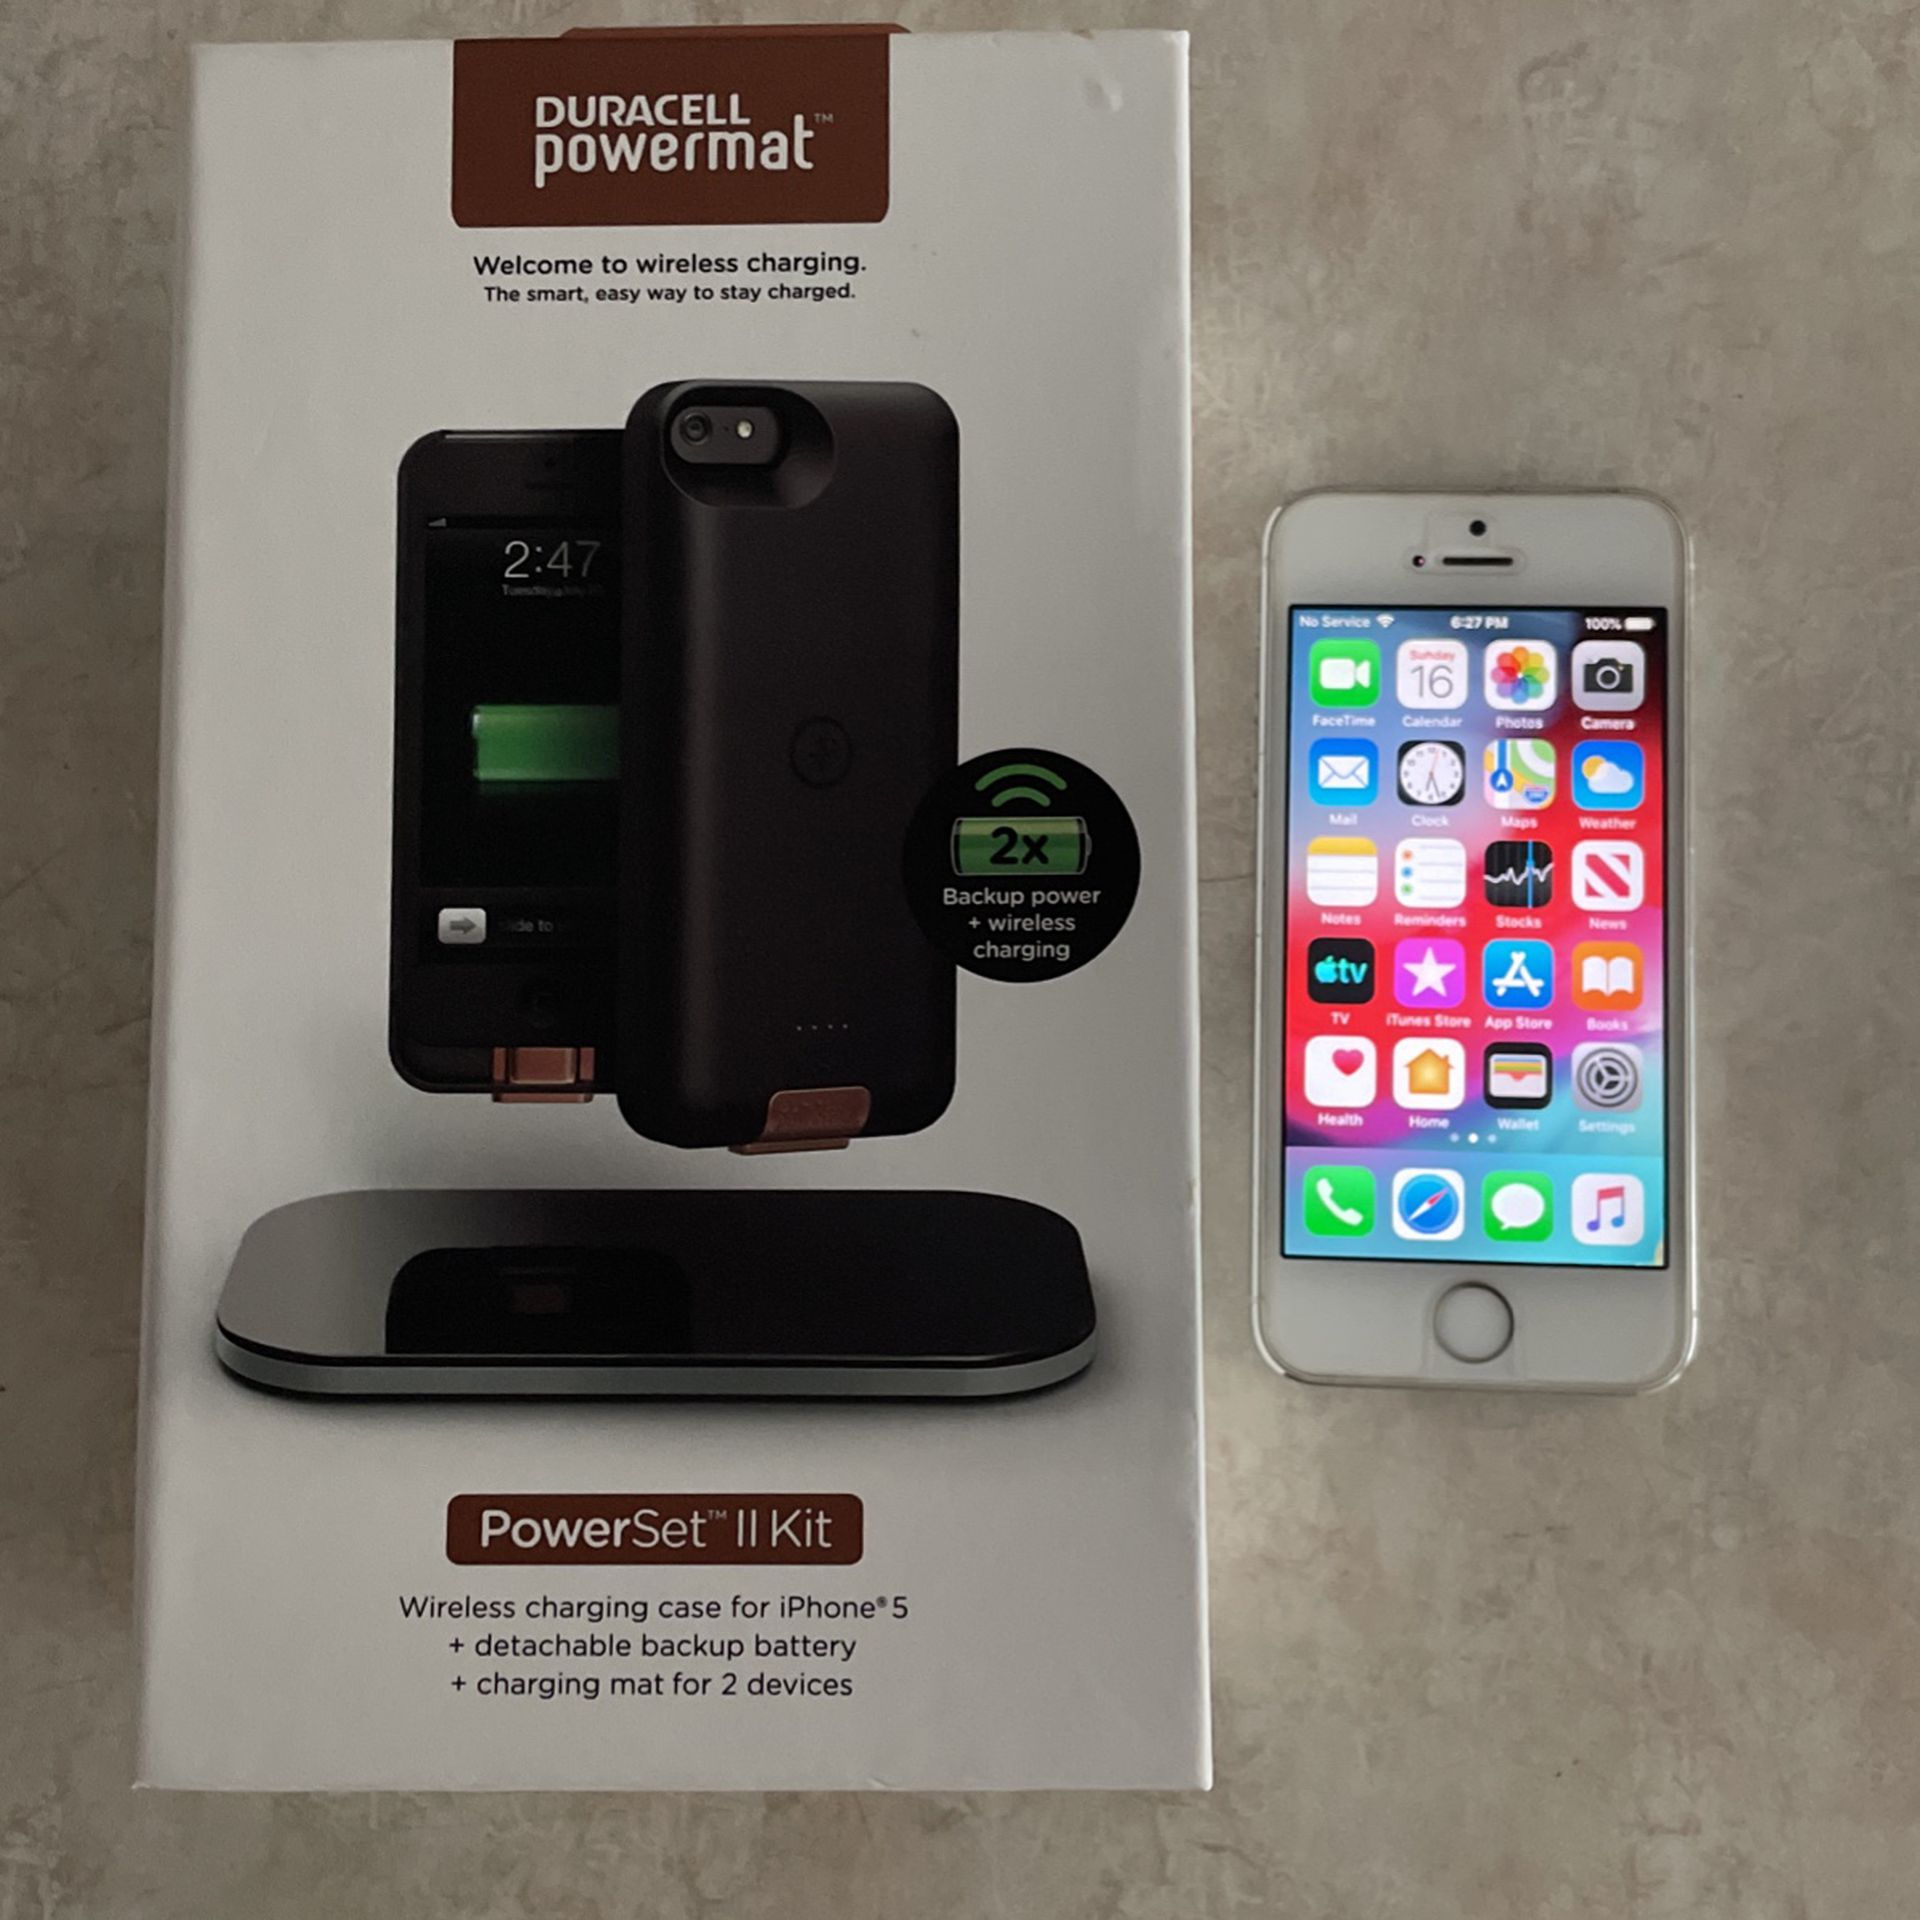 IPhone 5s With New Duracell Powermat System